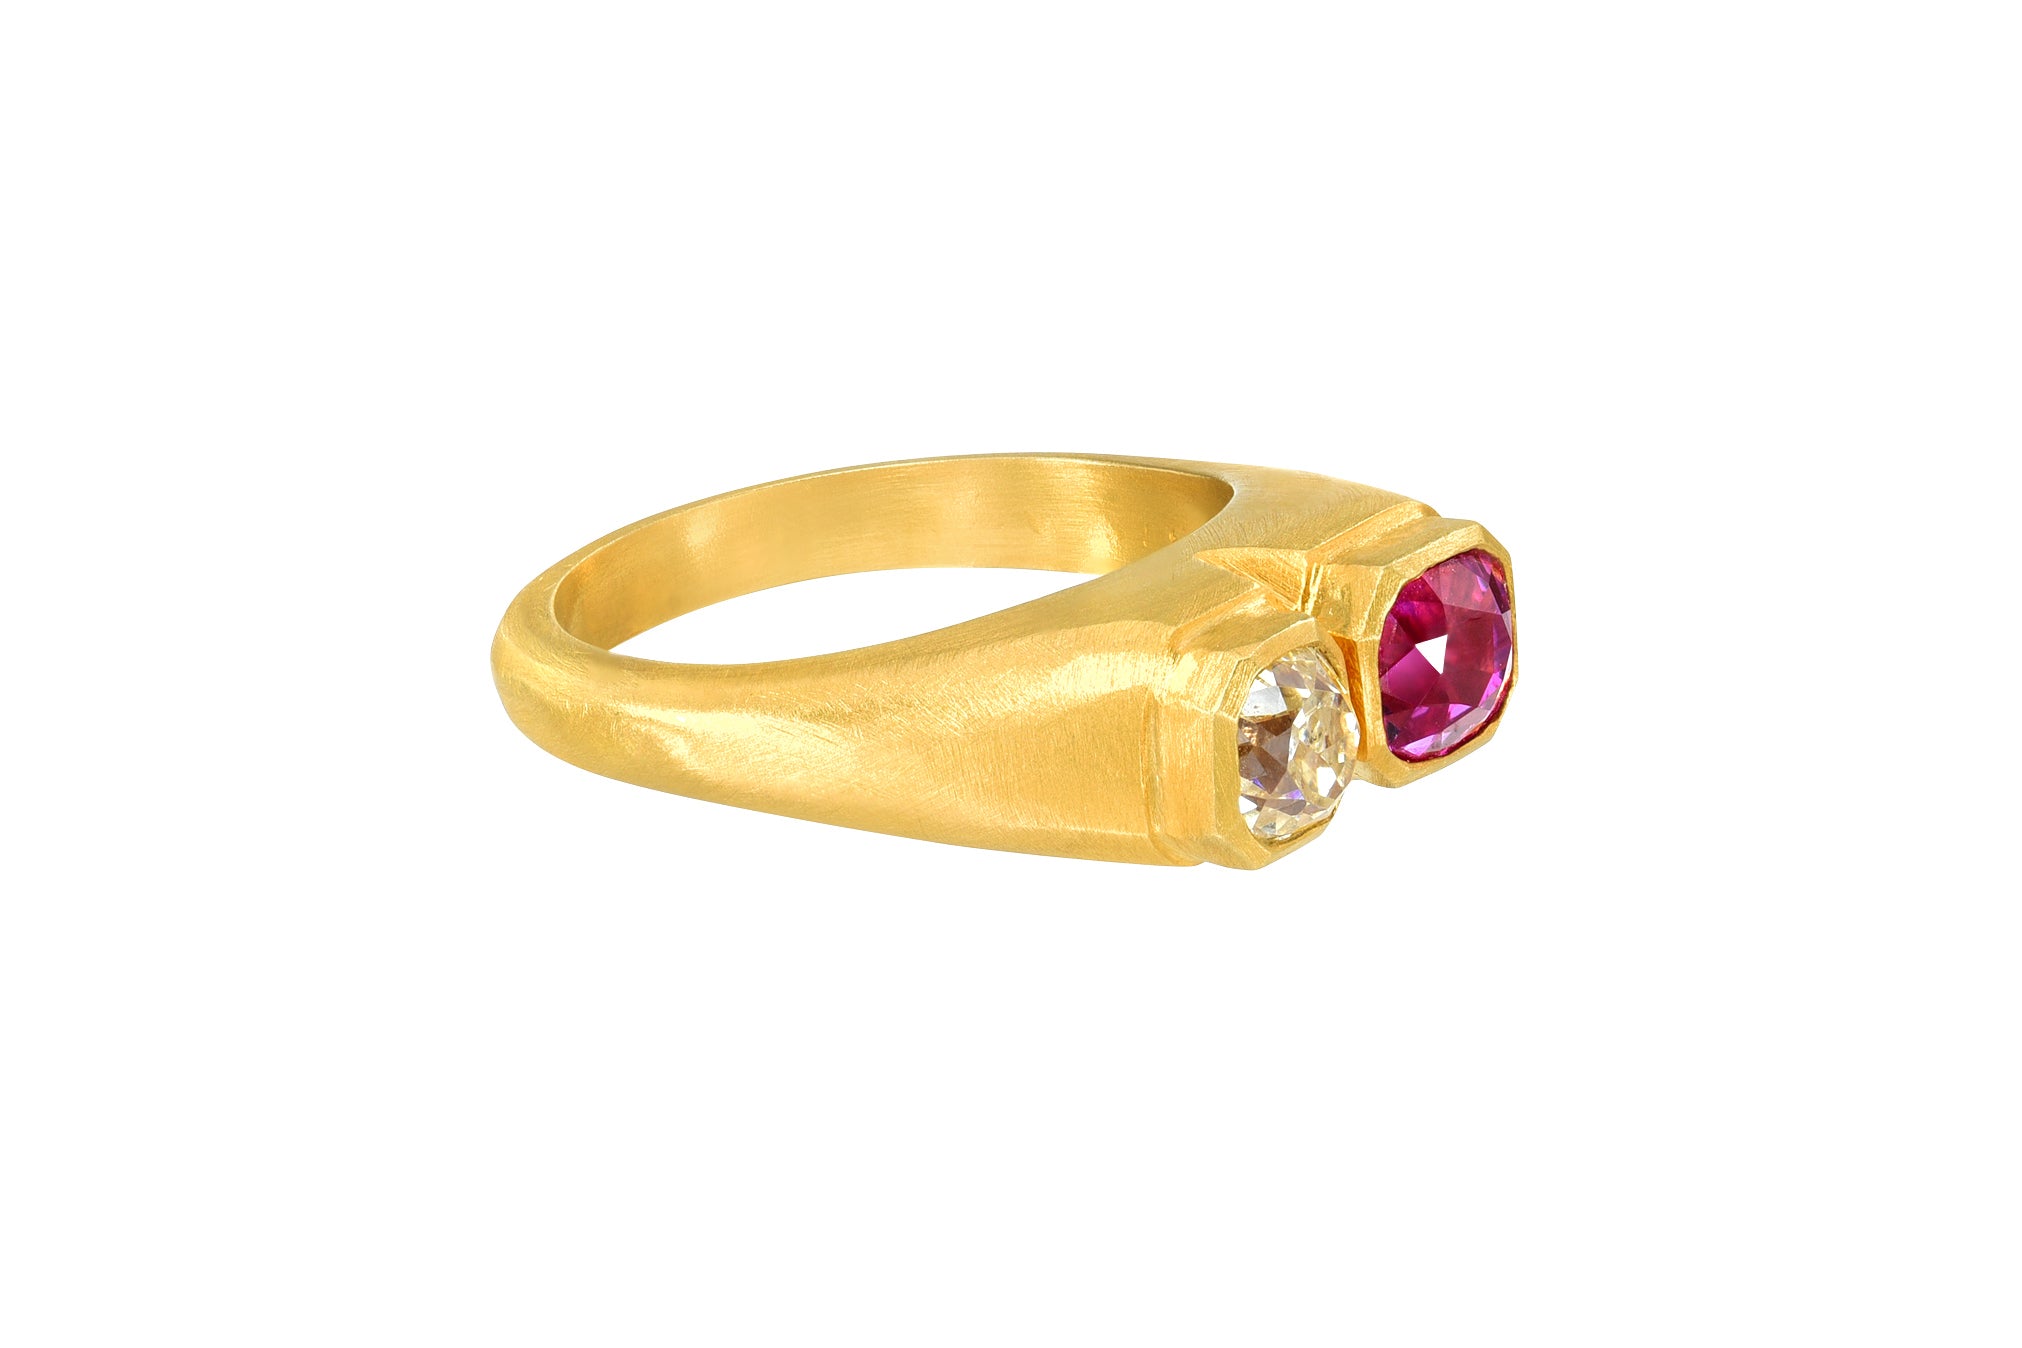 Darius Jewels one of a kind double pink sapphire & diamond ring